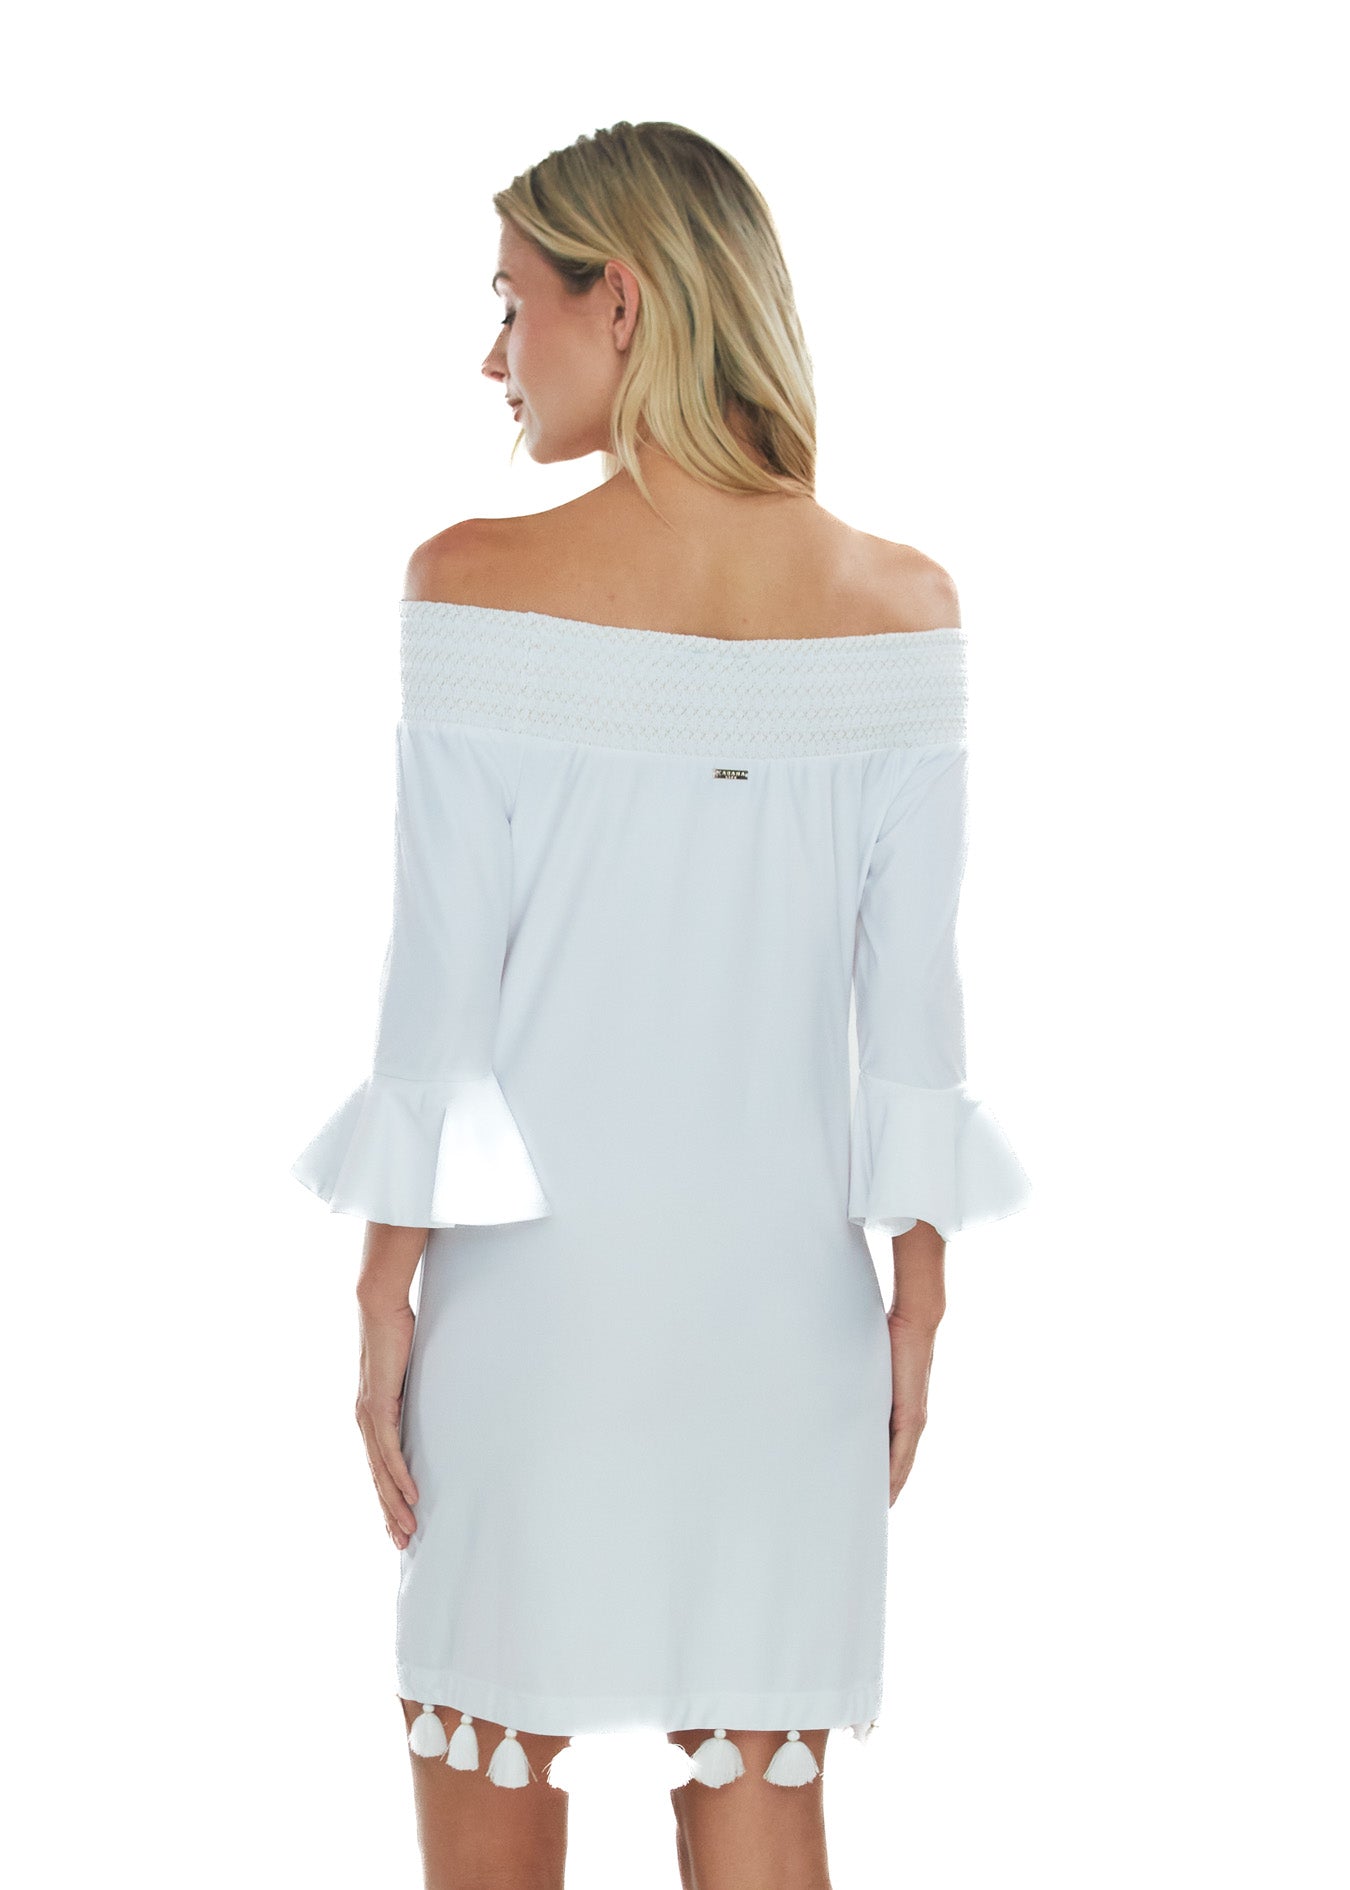 Blonde model wearing the White Embroidered Off The Shoulder Dress with hands at sides.